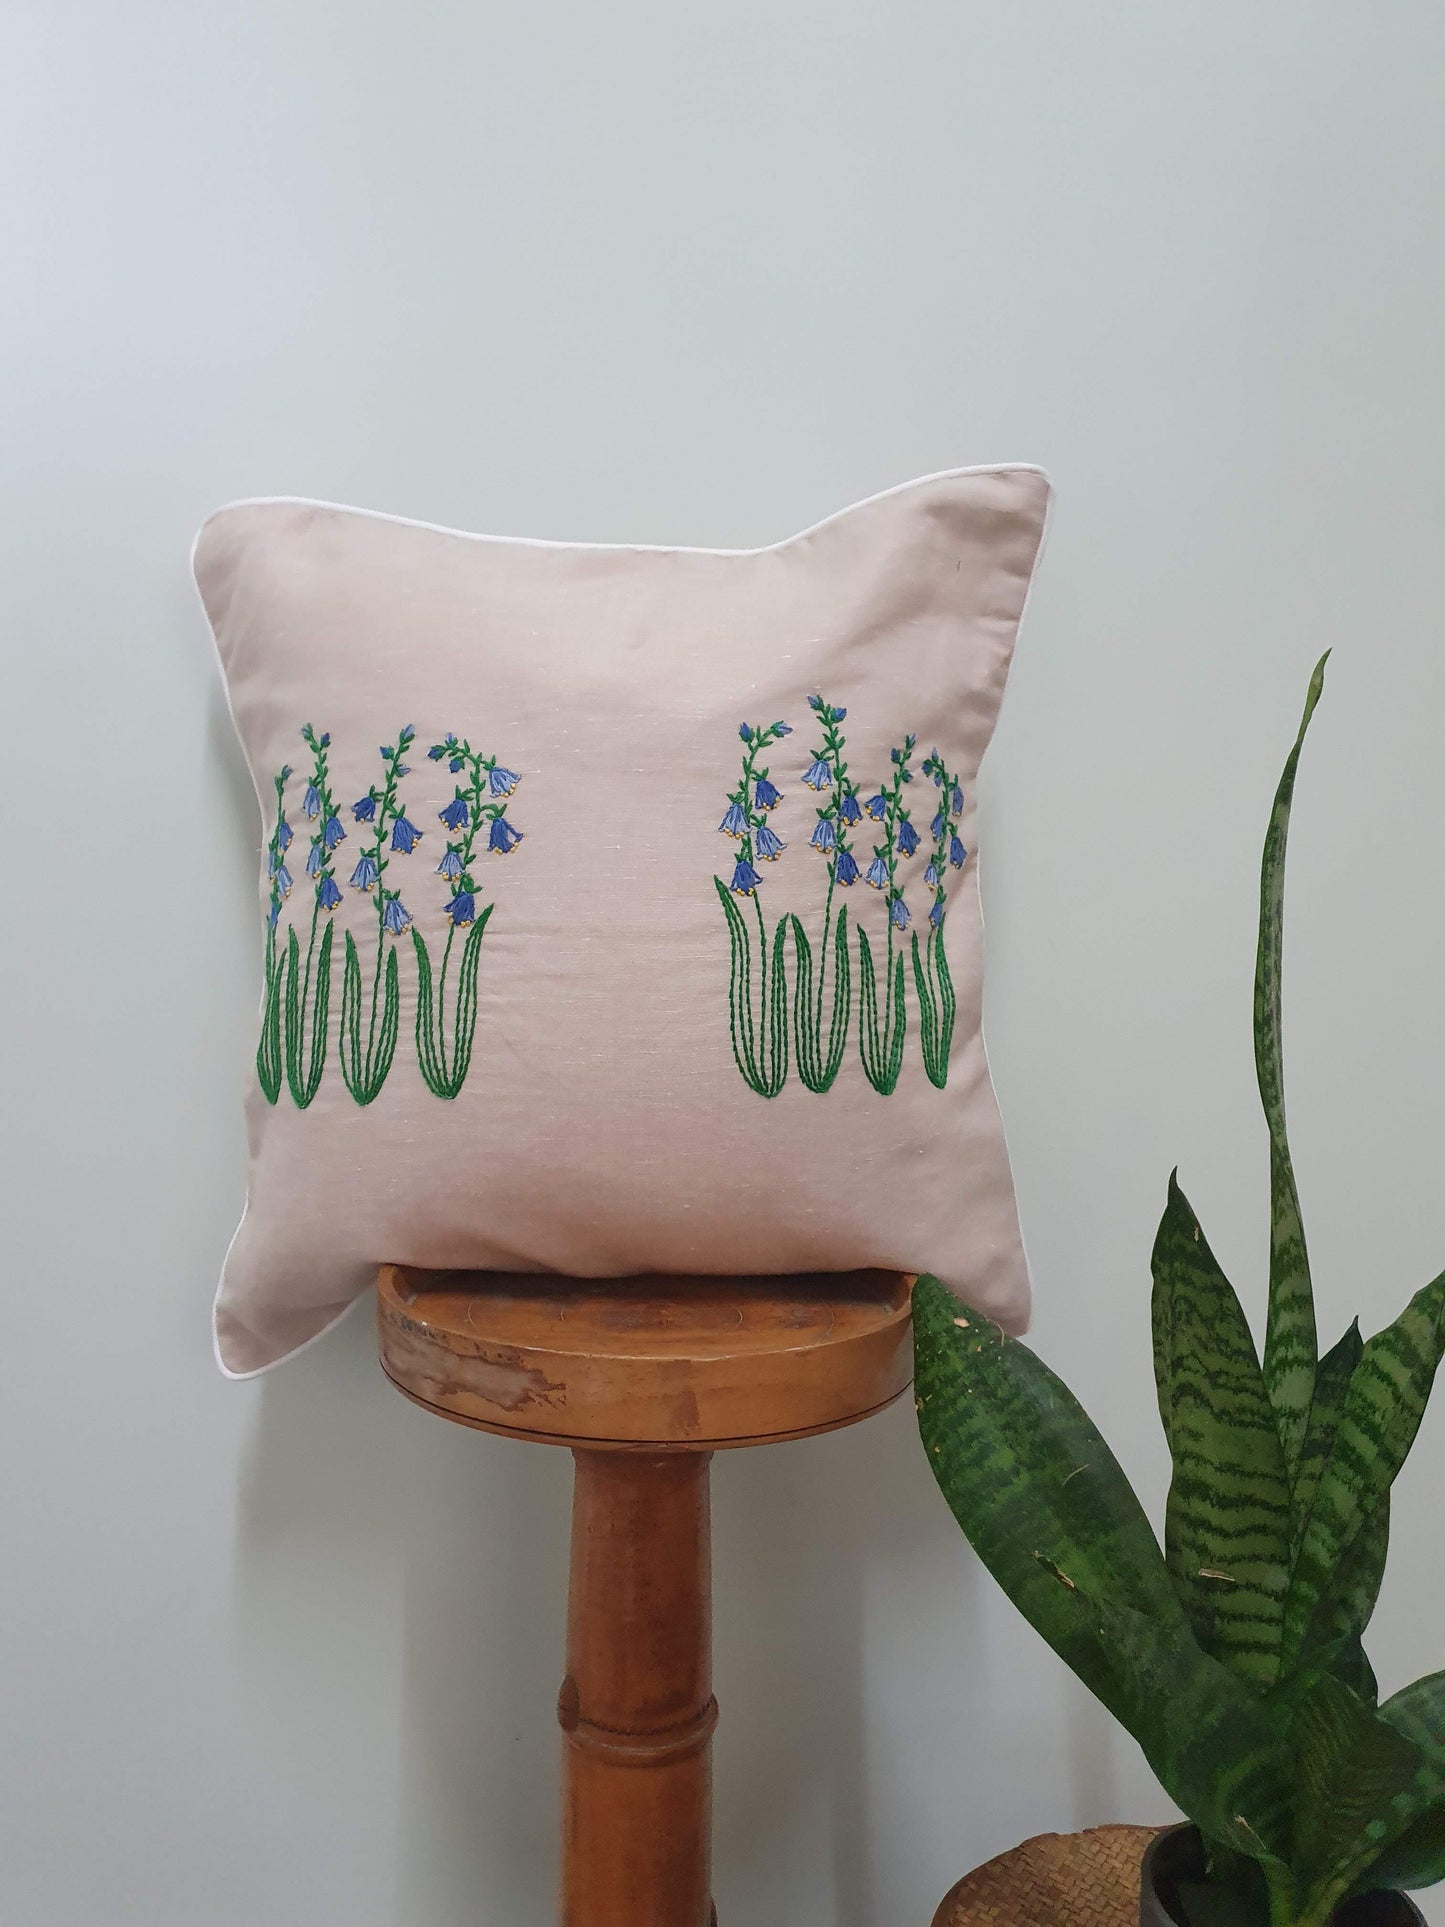 Ikali – Lavender Wreath - Hand-embroidered Cushion Cover Set (Set of 2)